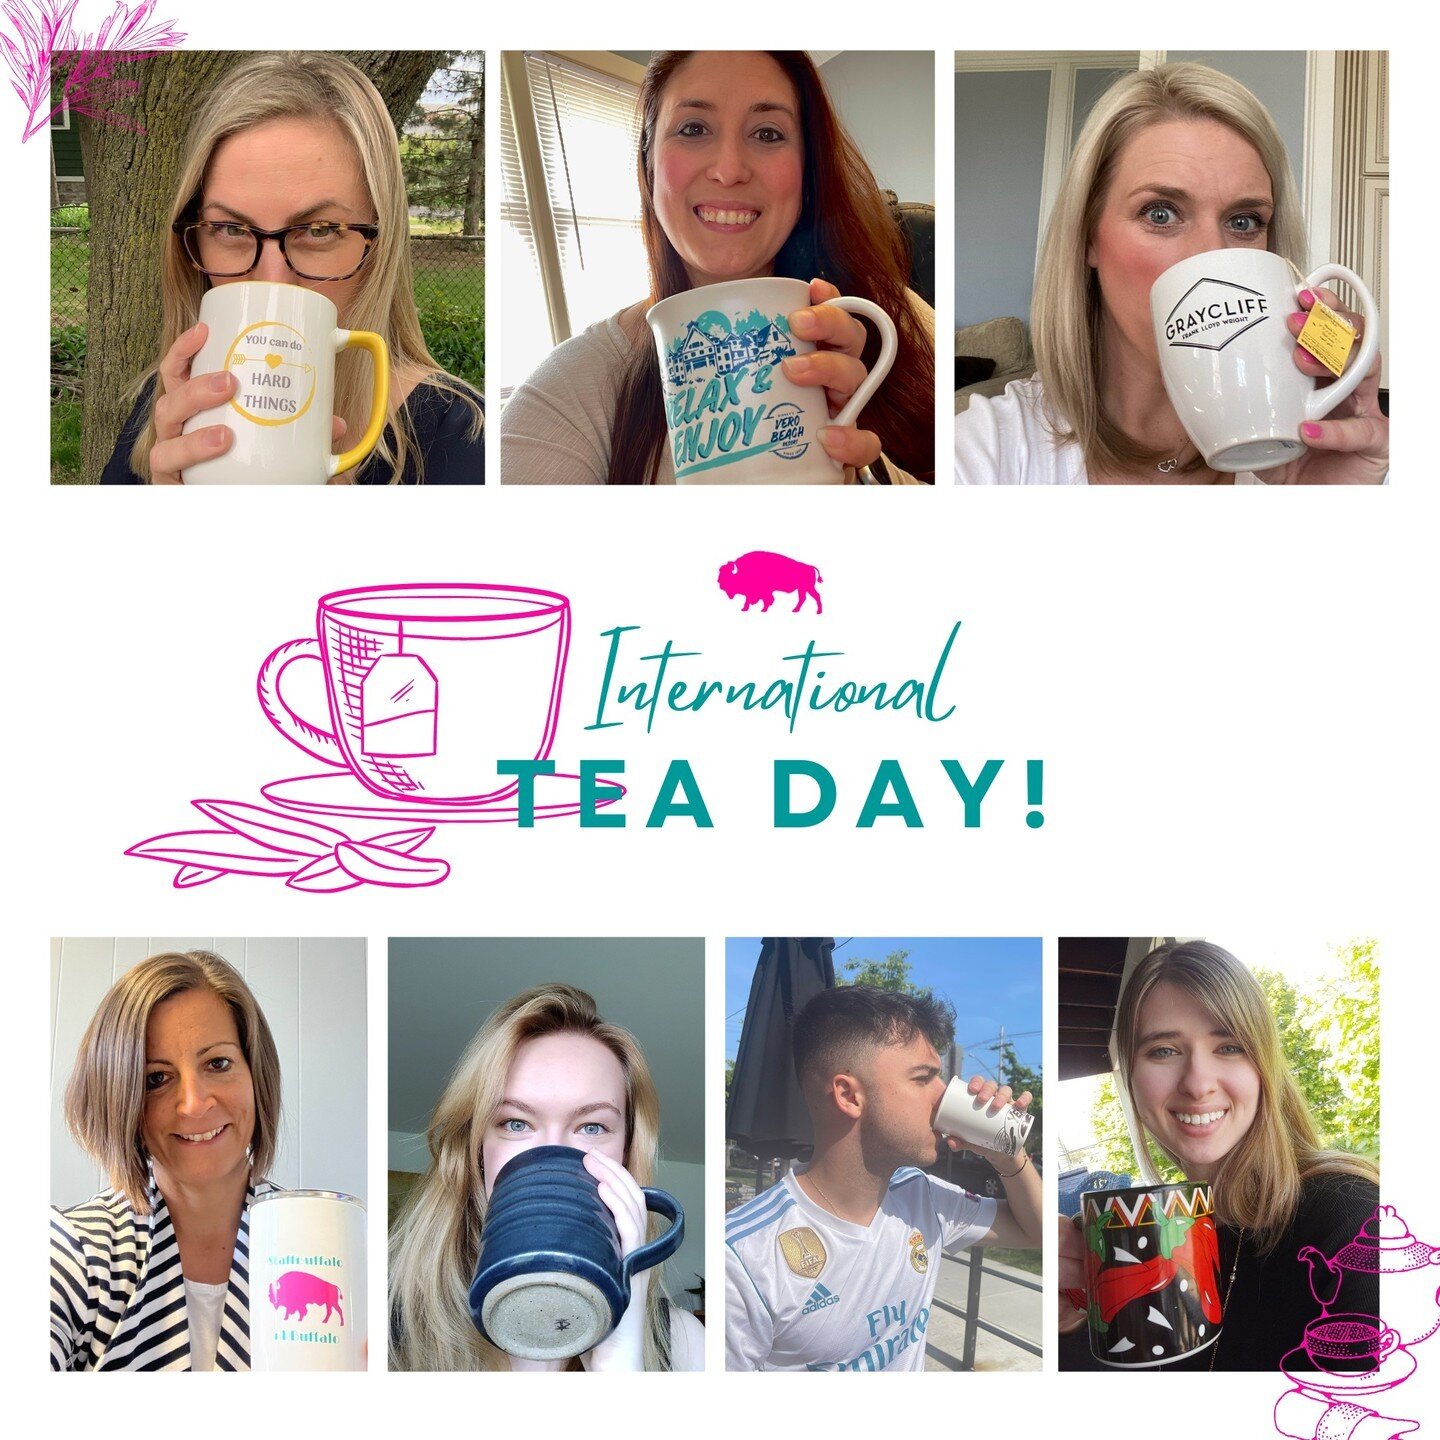 ☕ Happy International Tea Day! At StaffBuffalo, we're a team of tea enthusiasts who appreciate this delightful beverage's soothing power and diverse flavors. Cheers to the joy of tea! 

🍵❤️ #NationalTeaDay #TeaLovers #teamtea @Staffbuffalo @hrbuffal